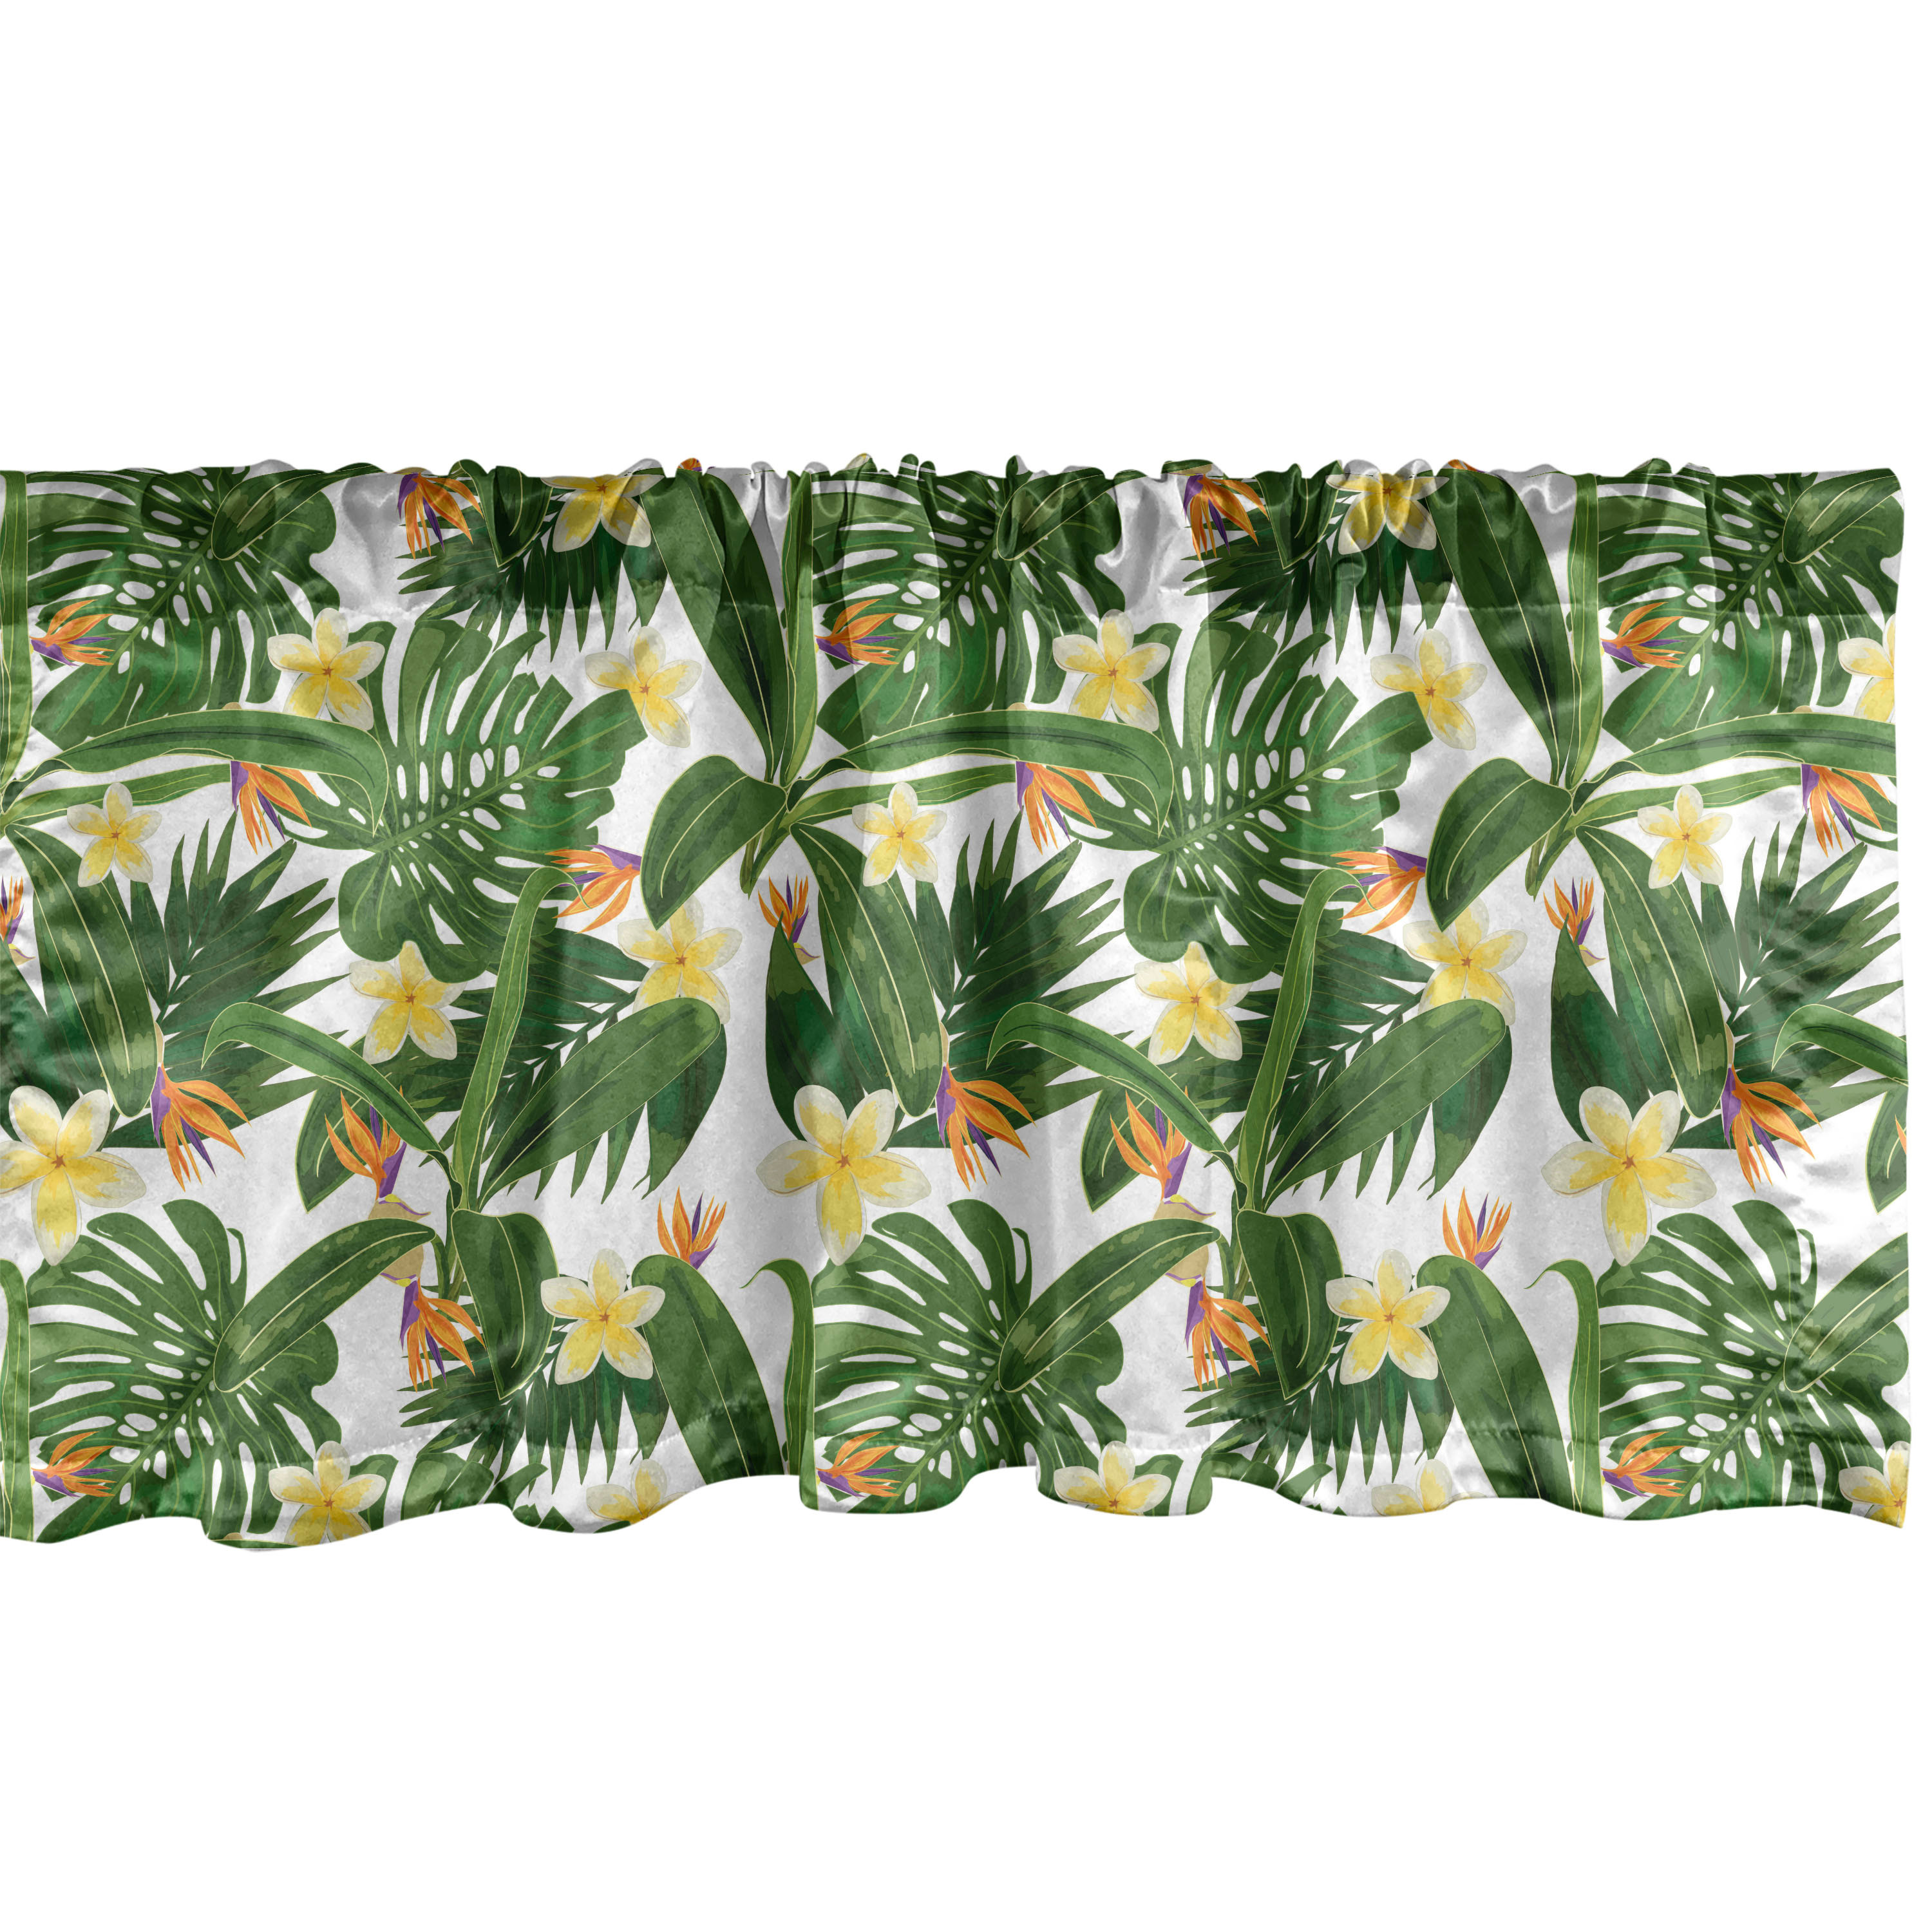 Ambesonne Tropical Valance Pack of 2, Strelitzia Monstera Palm, 42